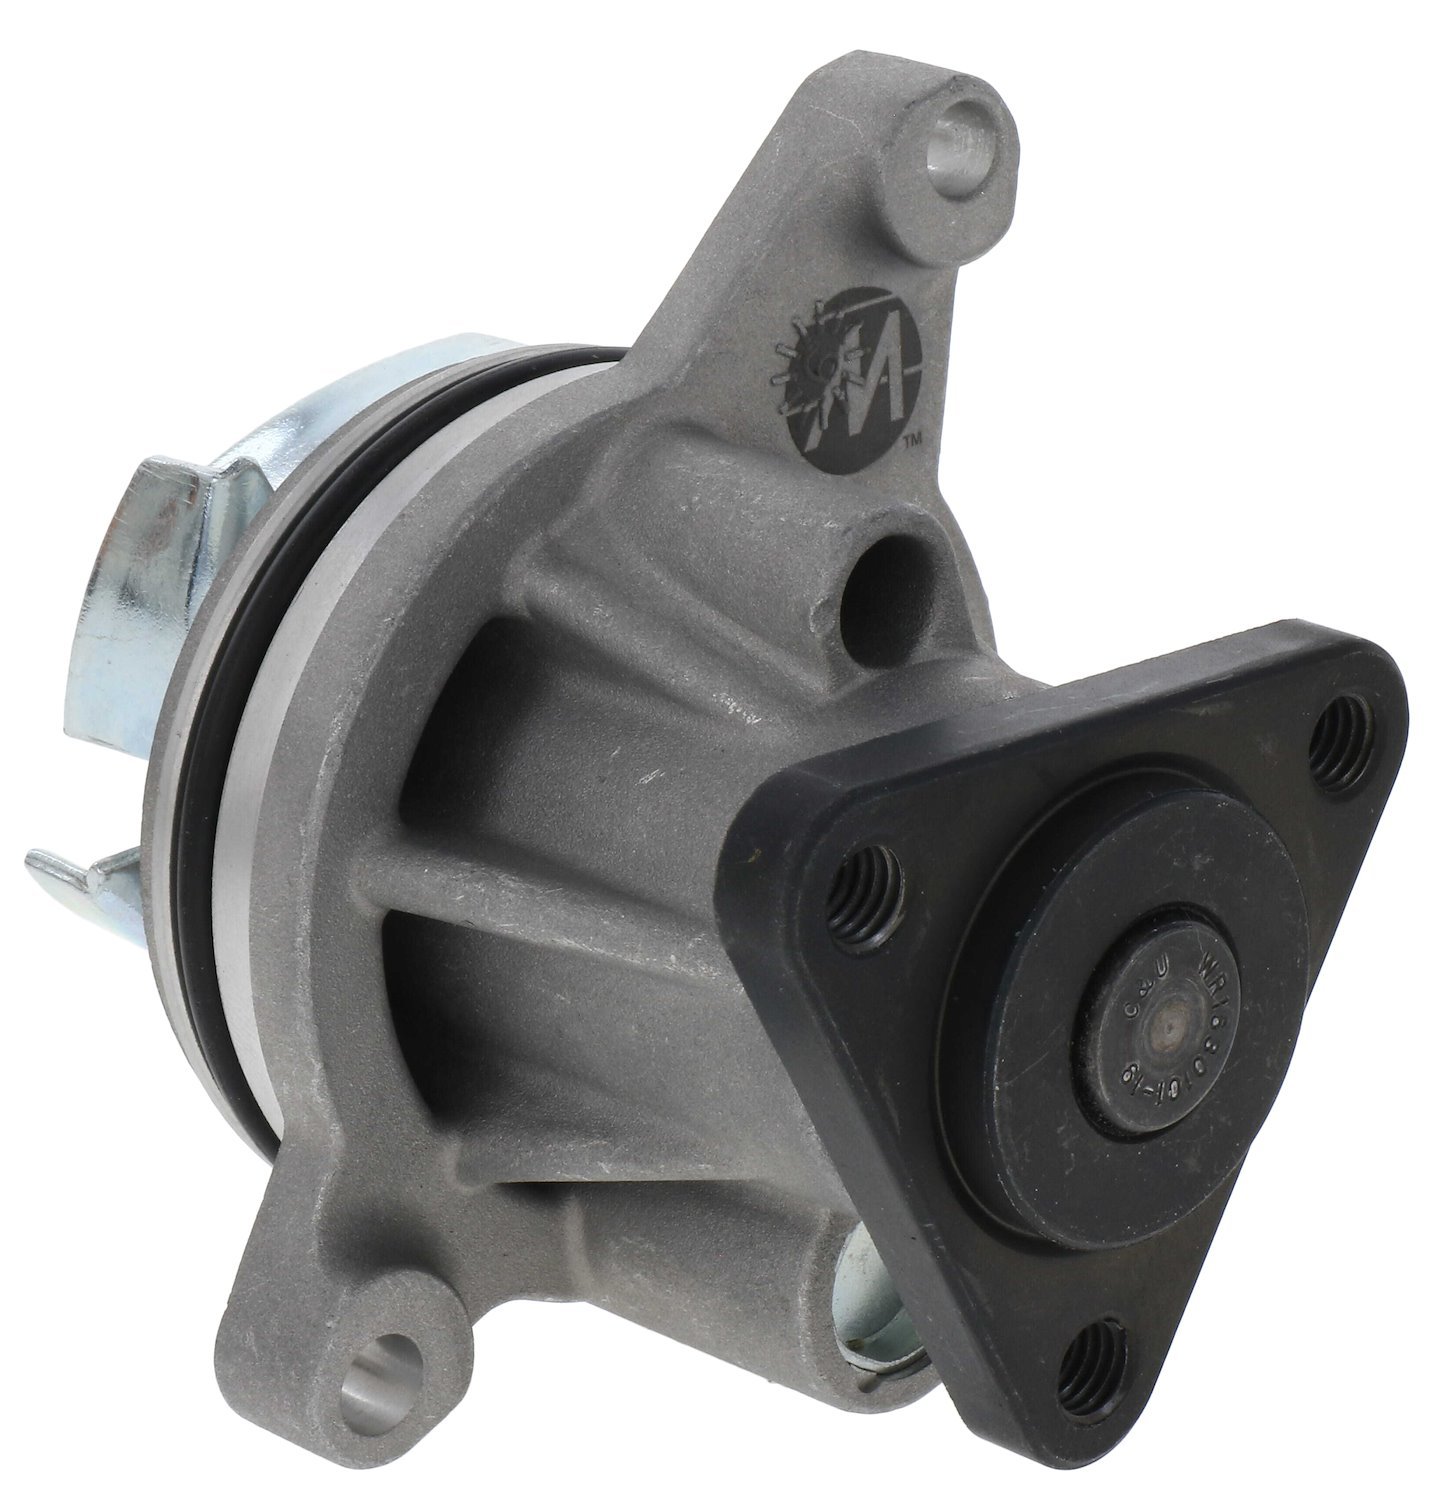 Water Pump Fits Select 2001-2018 Ford/Lincoln/Mercury